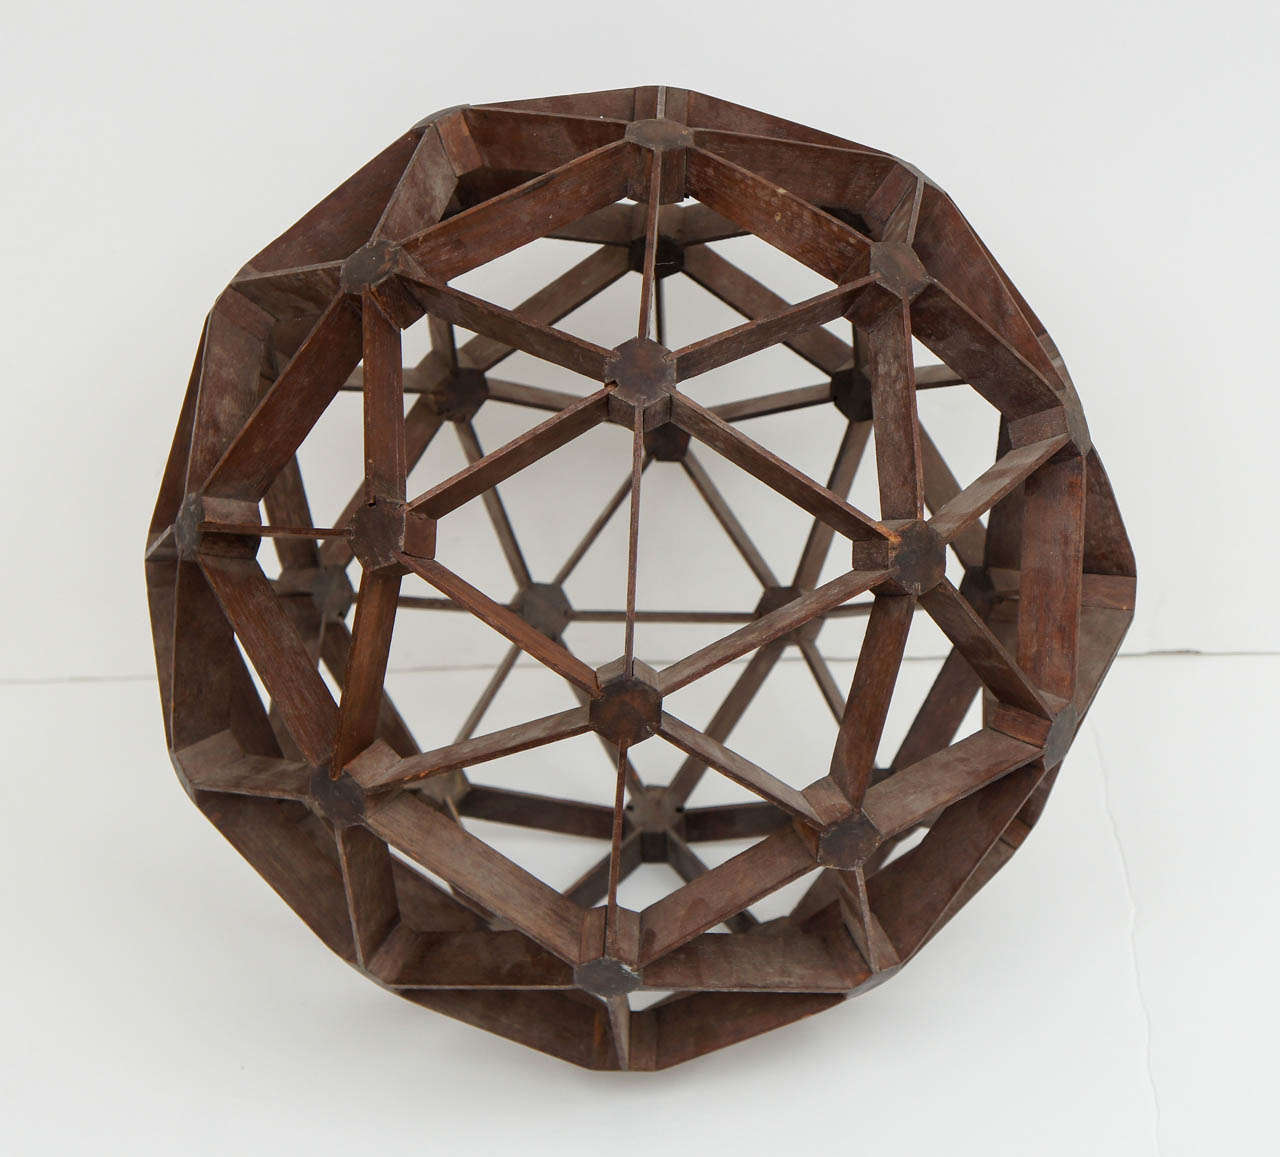 Early 20th Century Hand Created Sculpture.
A Perfect Geodesic Sphere made from Pieces of Mahogany and Joined without Nails.